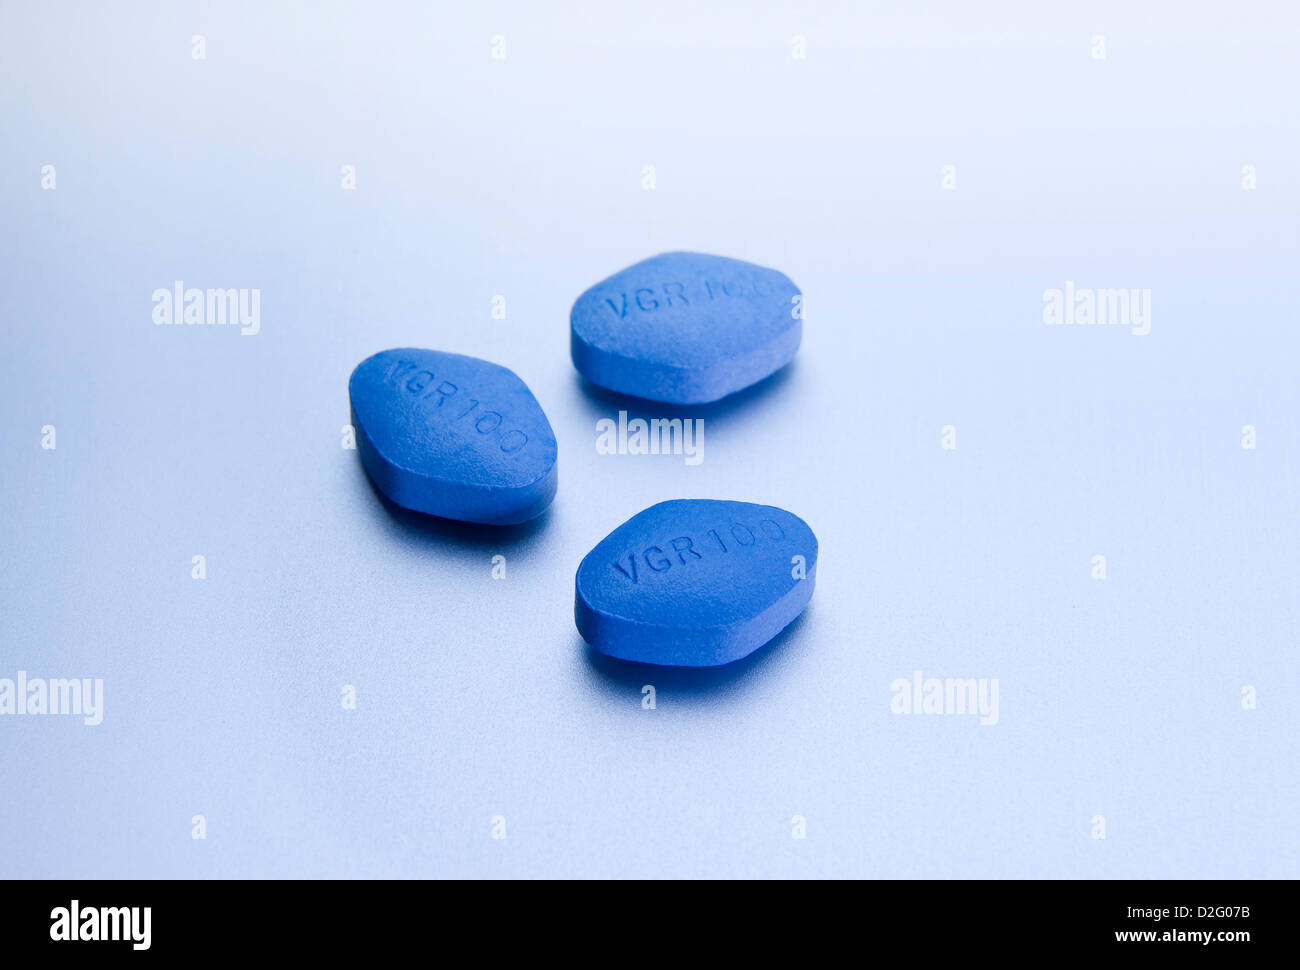 Close up Detail of 100mg Sildenafil Citrate Pfizer Viagra Pills which treat  Erectile Dysfunction, on a silver background Stock Photo - Alamy